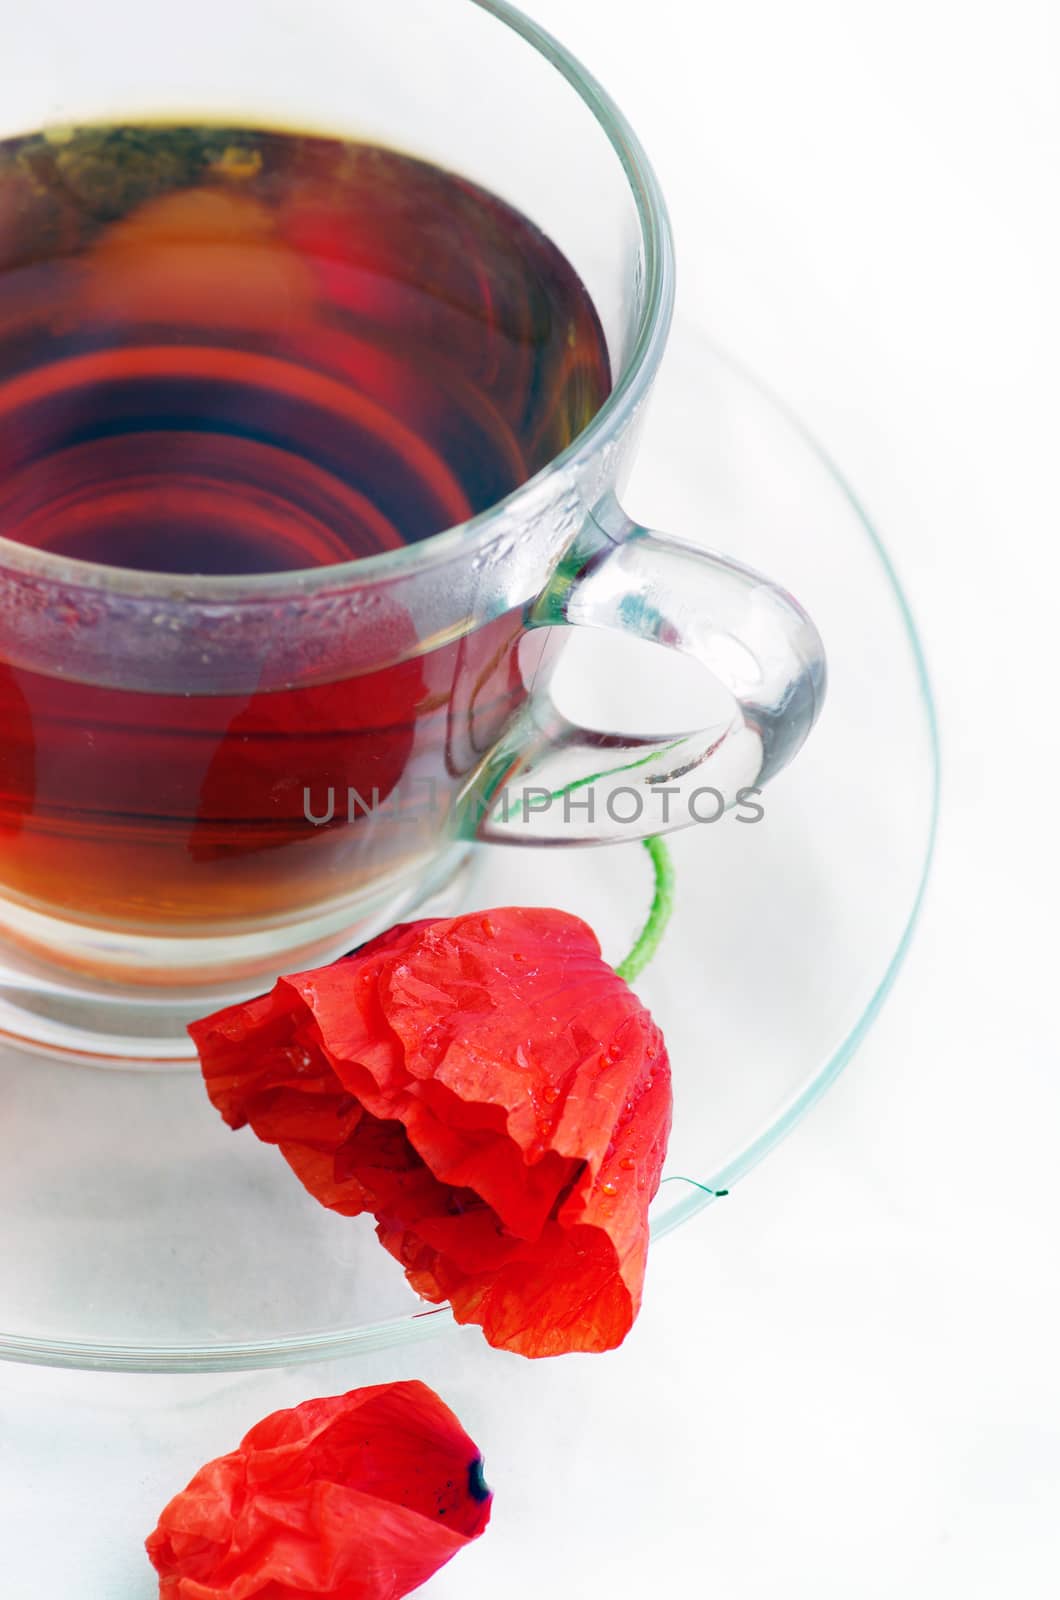 Poppy in glass cup on white table 